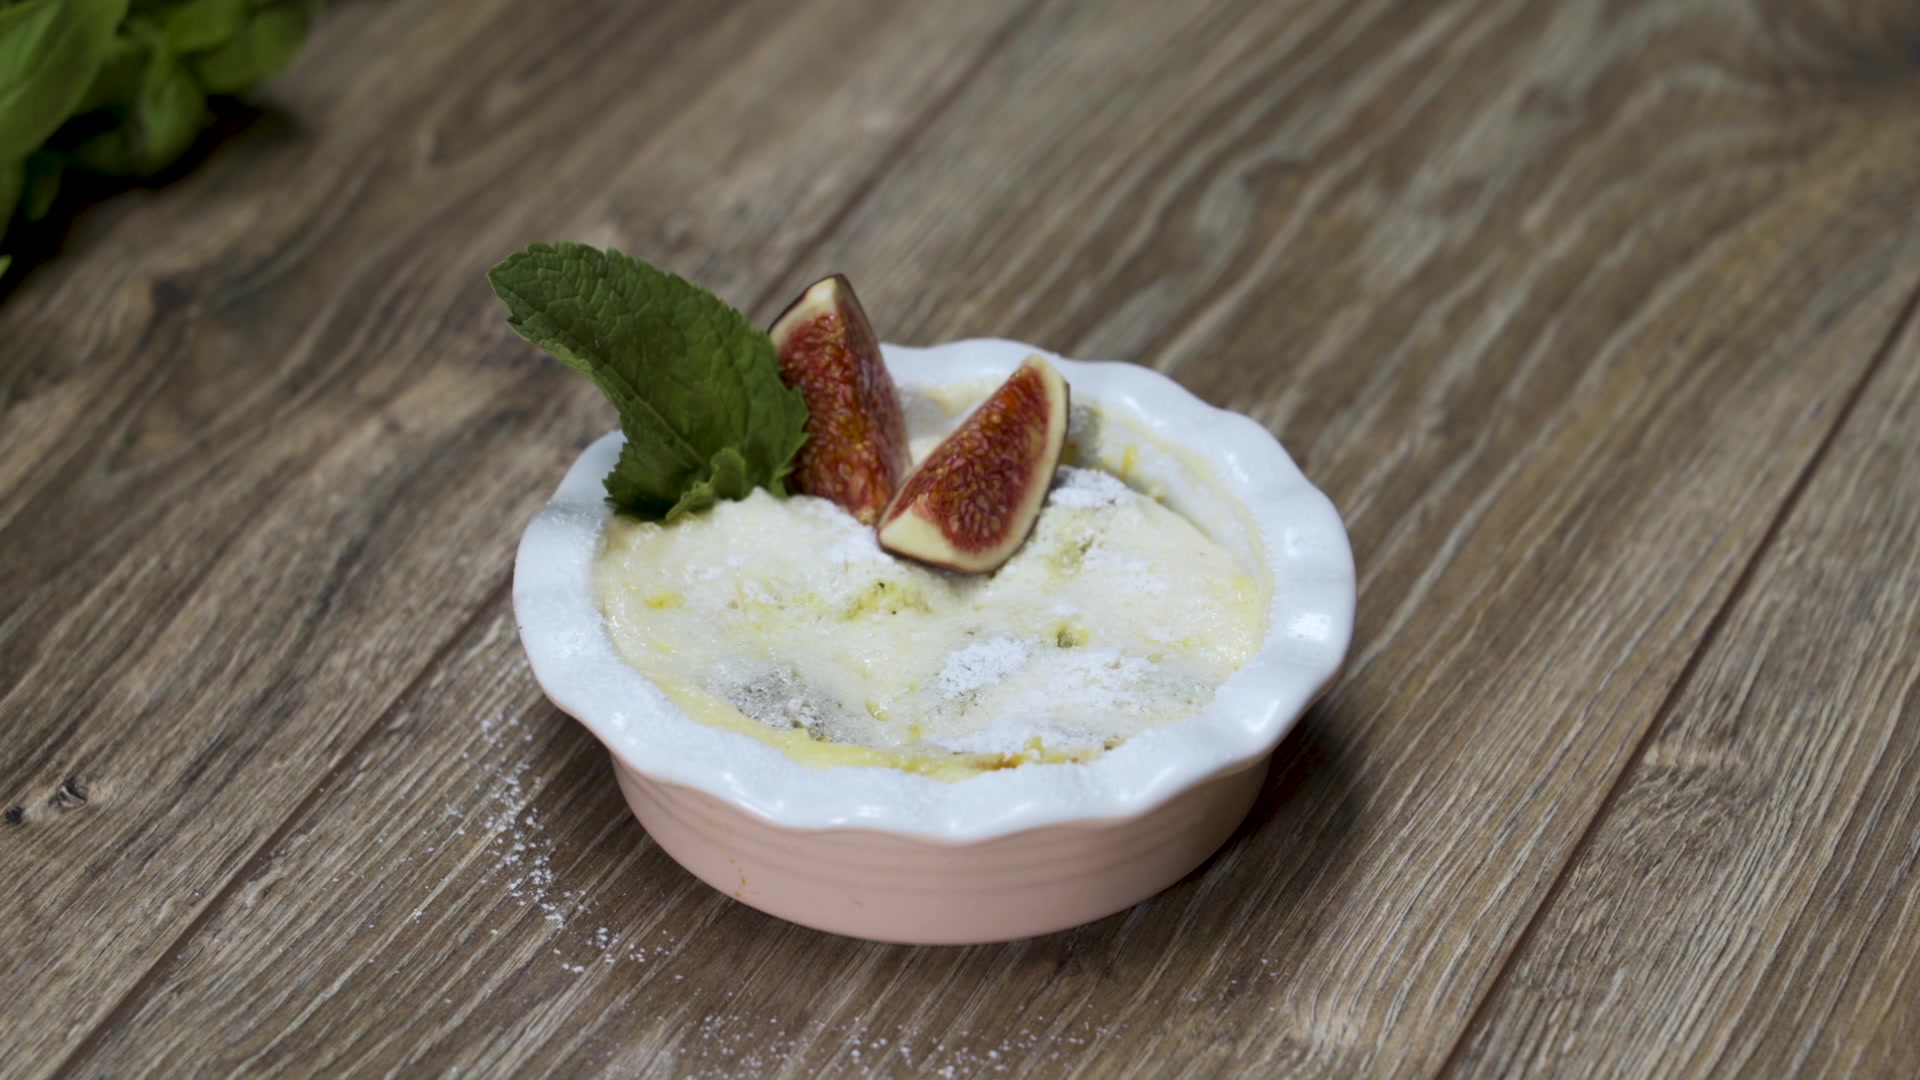 Milk pudding with figs